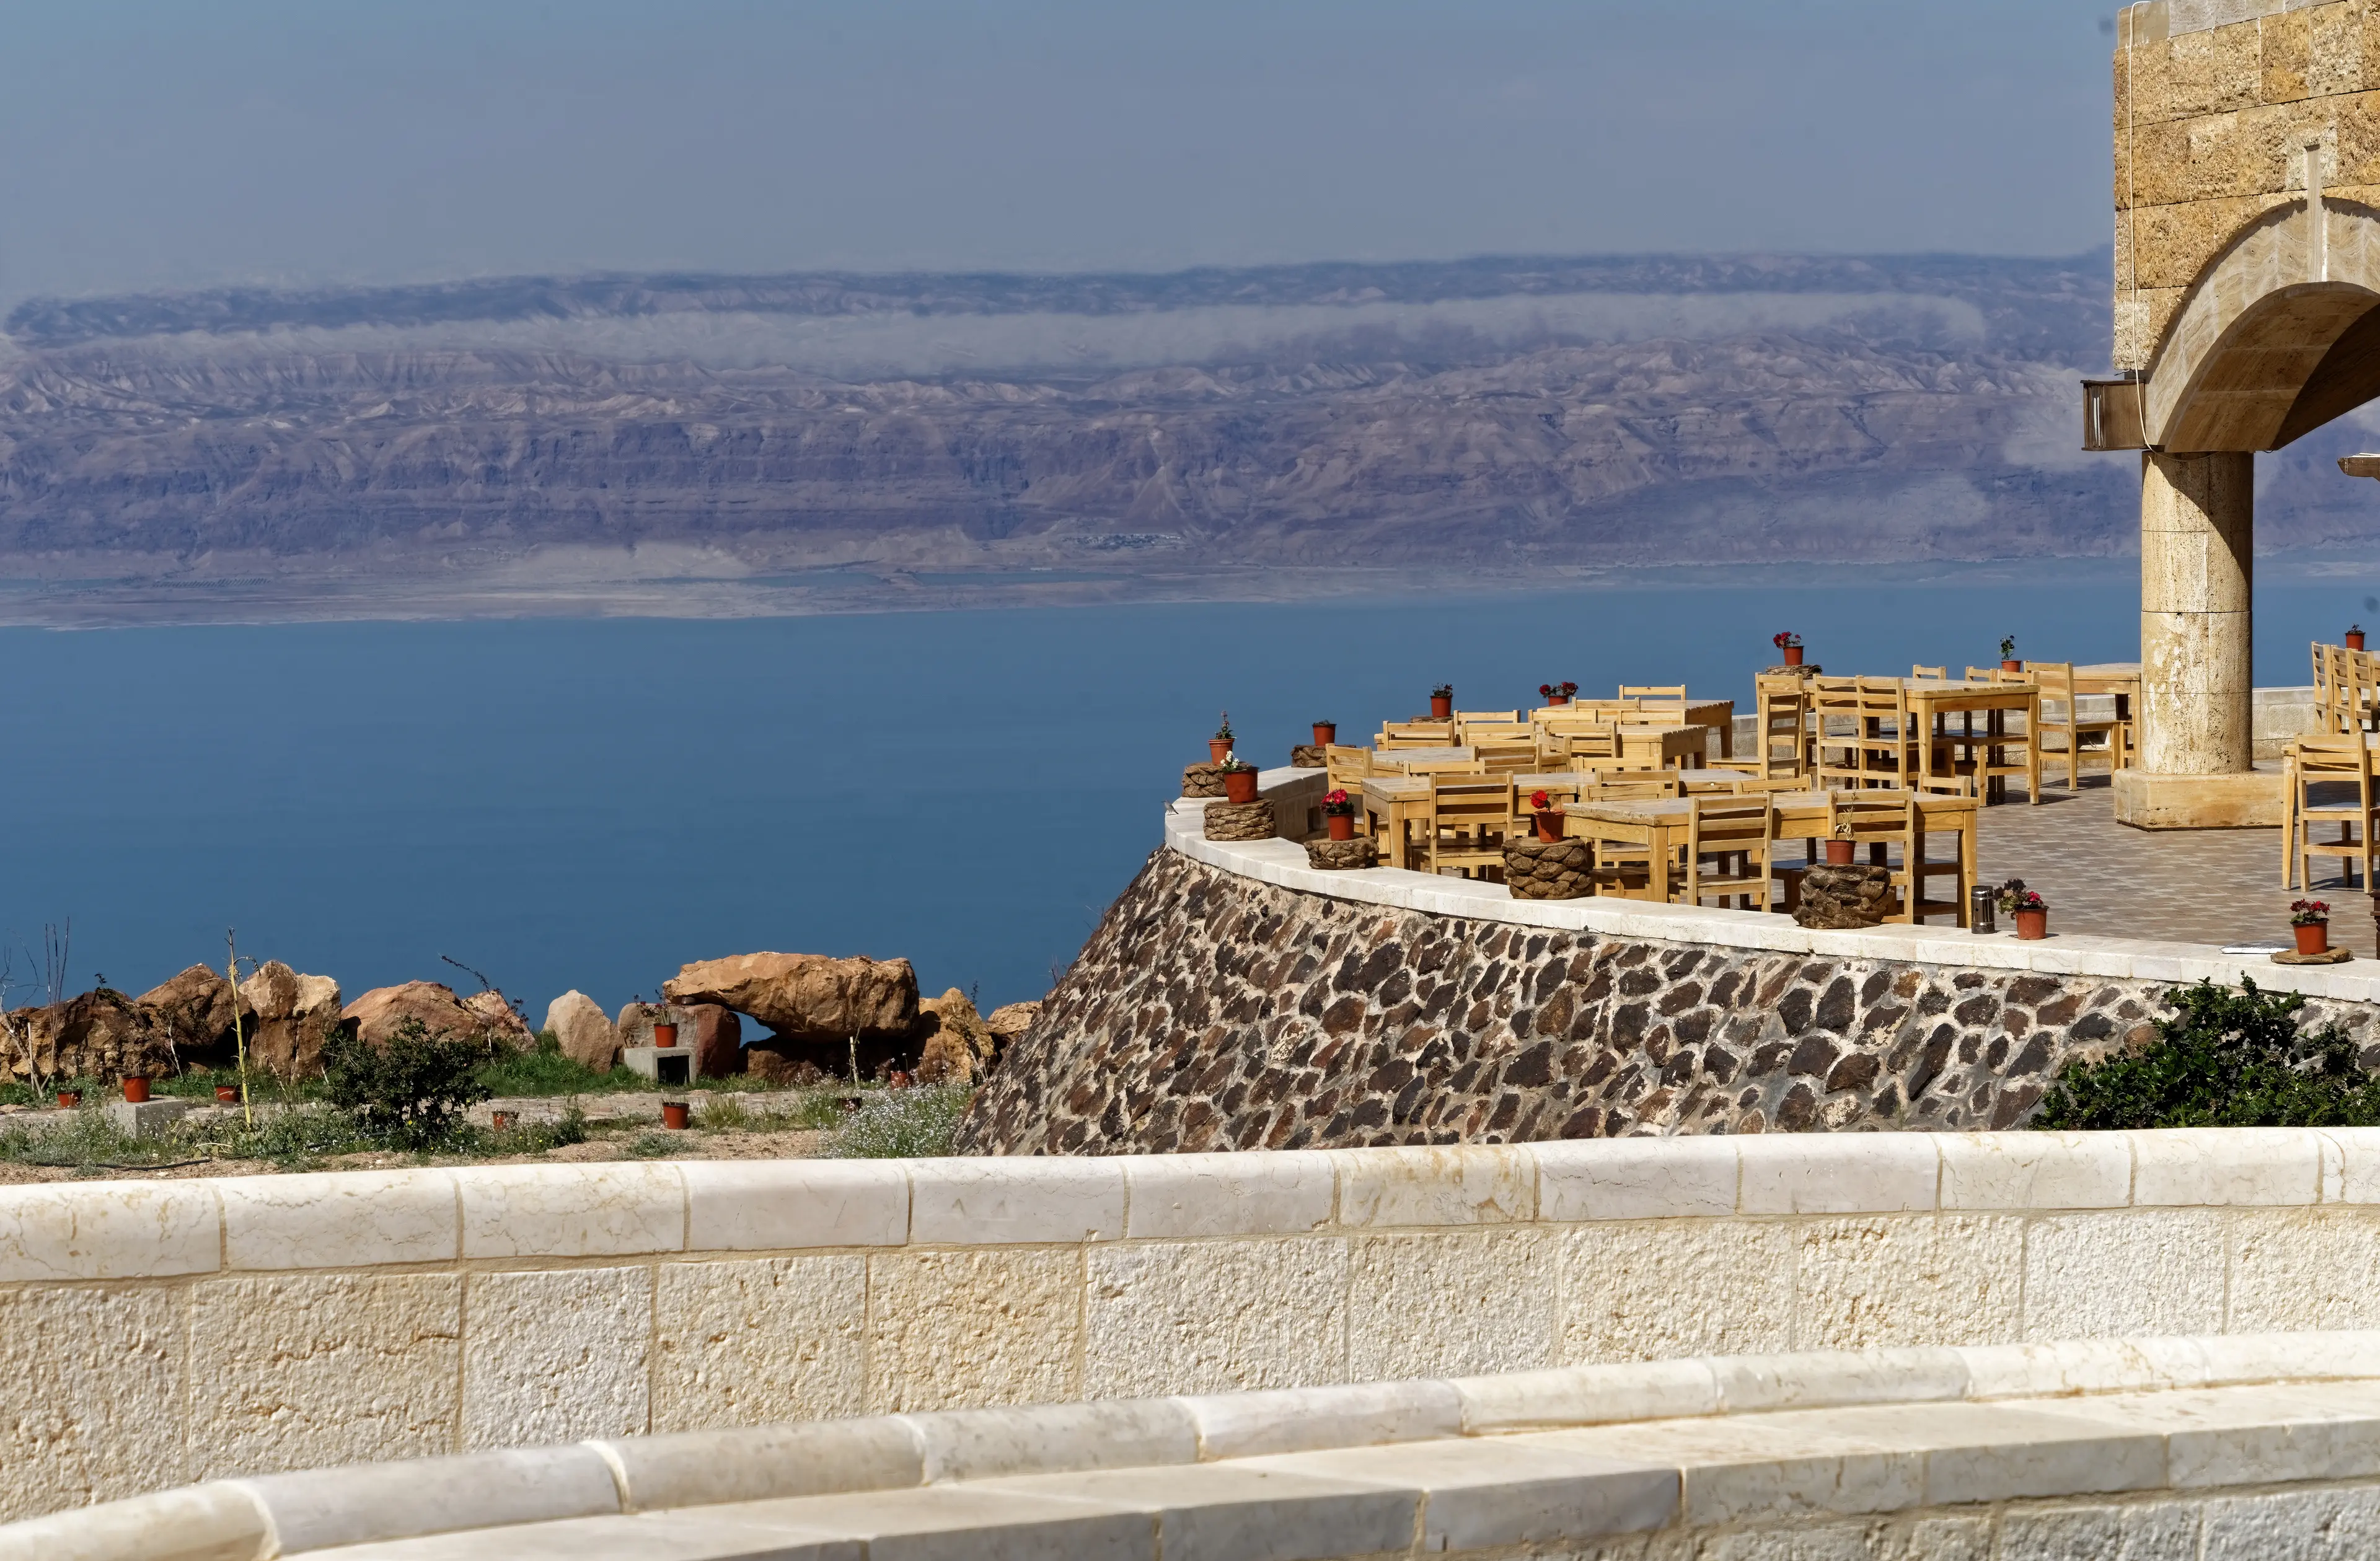 1-Day Local Food, Wine, and Relaxation Journey at Dead Sea, Jordan